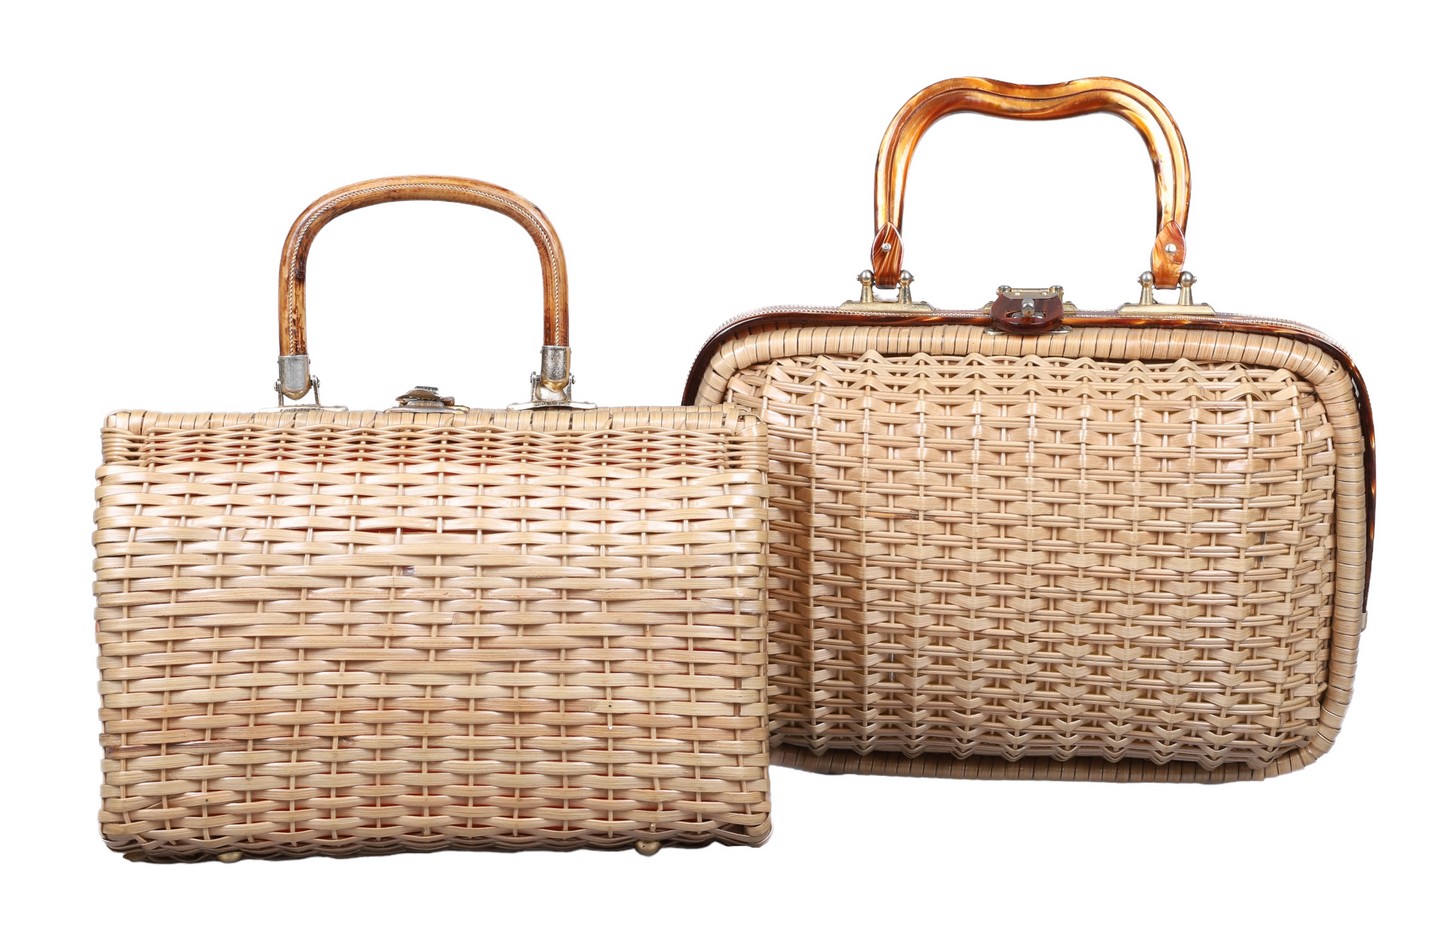  2 1960 s woven purses to include 27a6ad